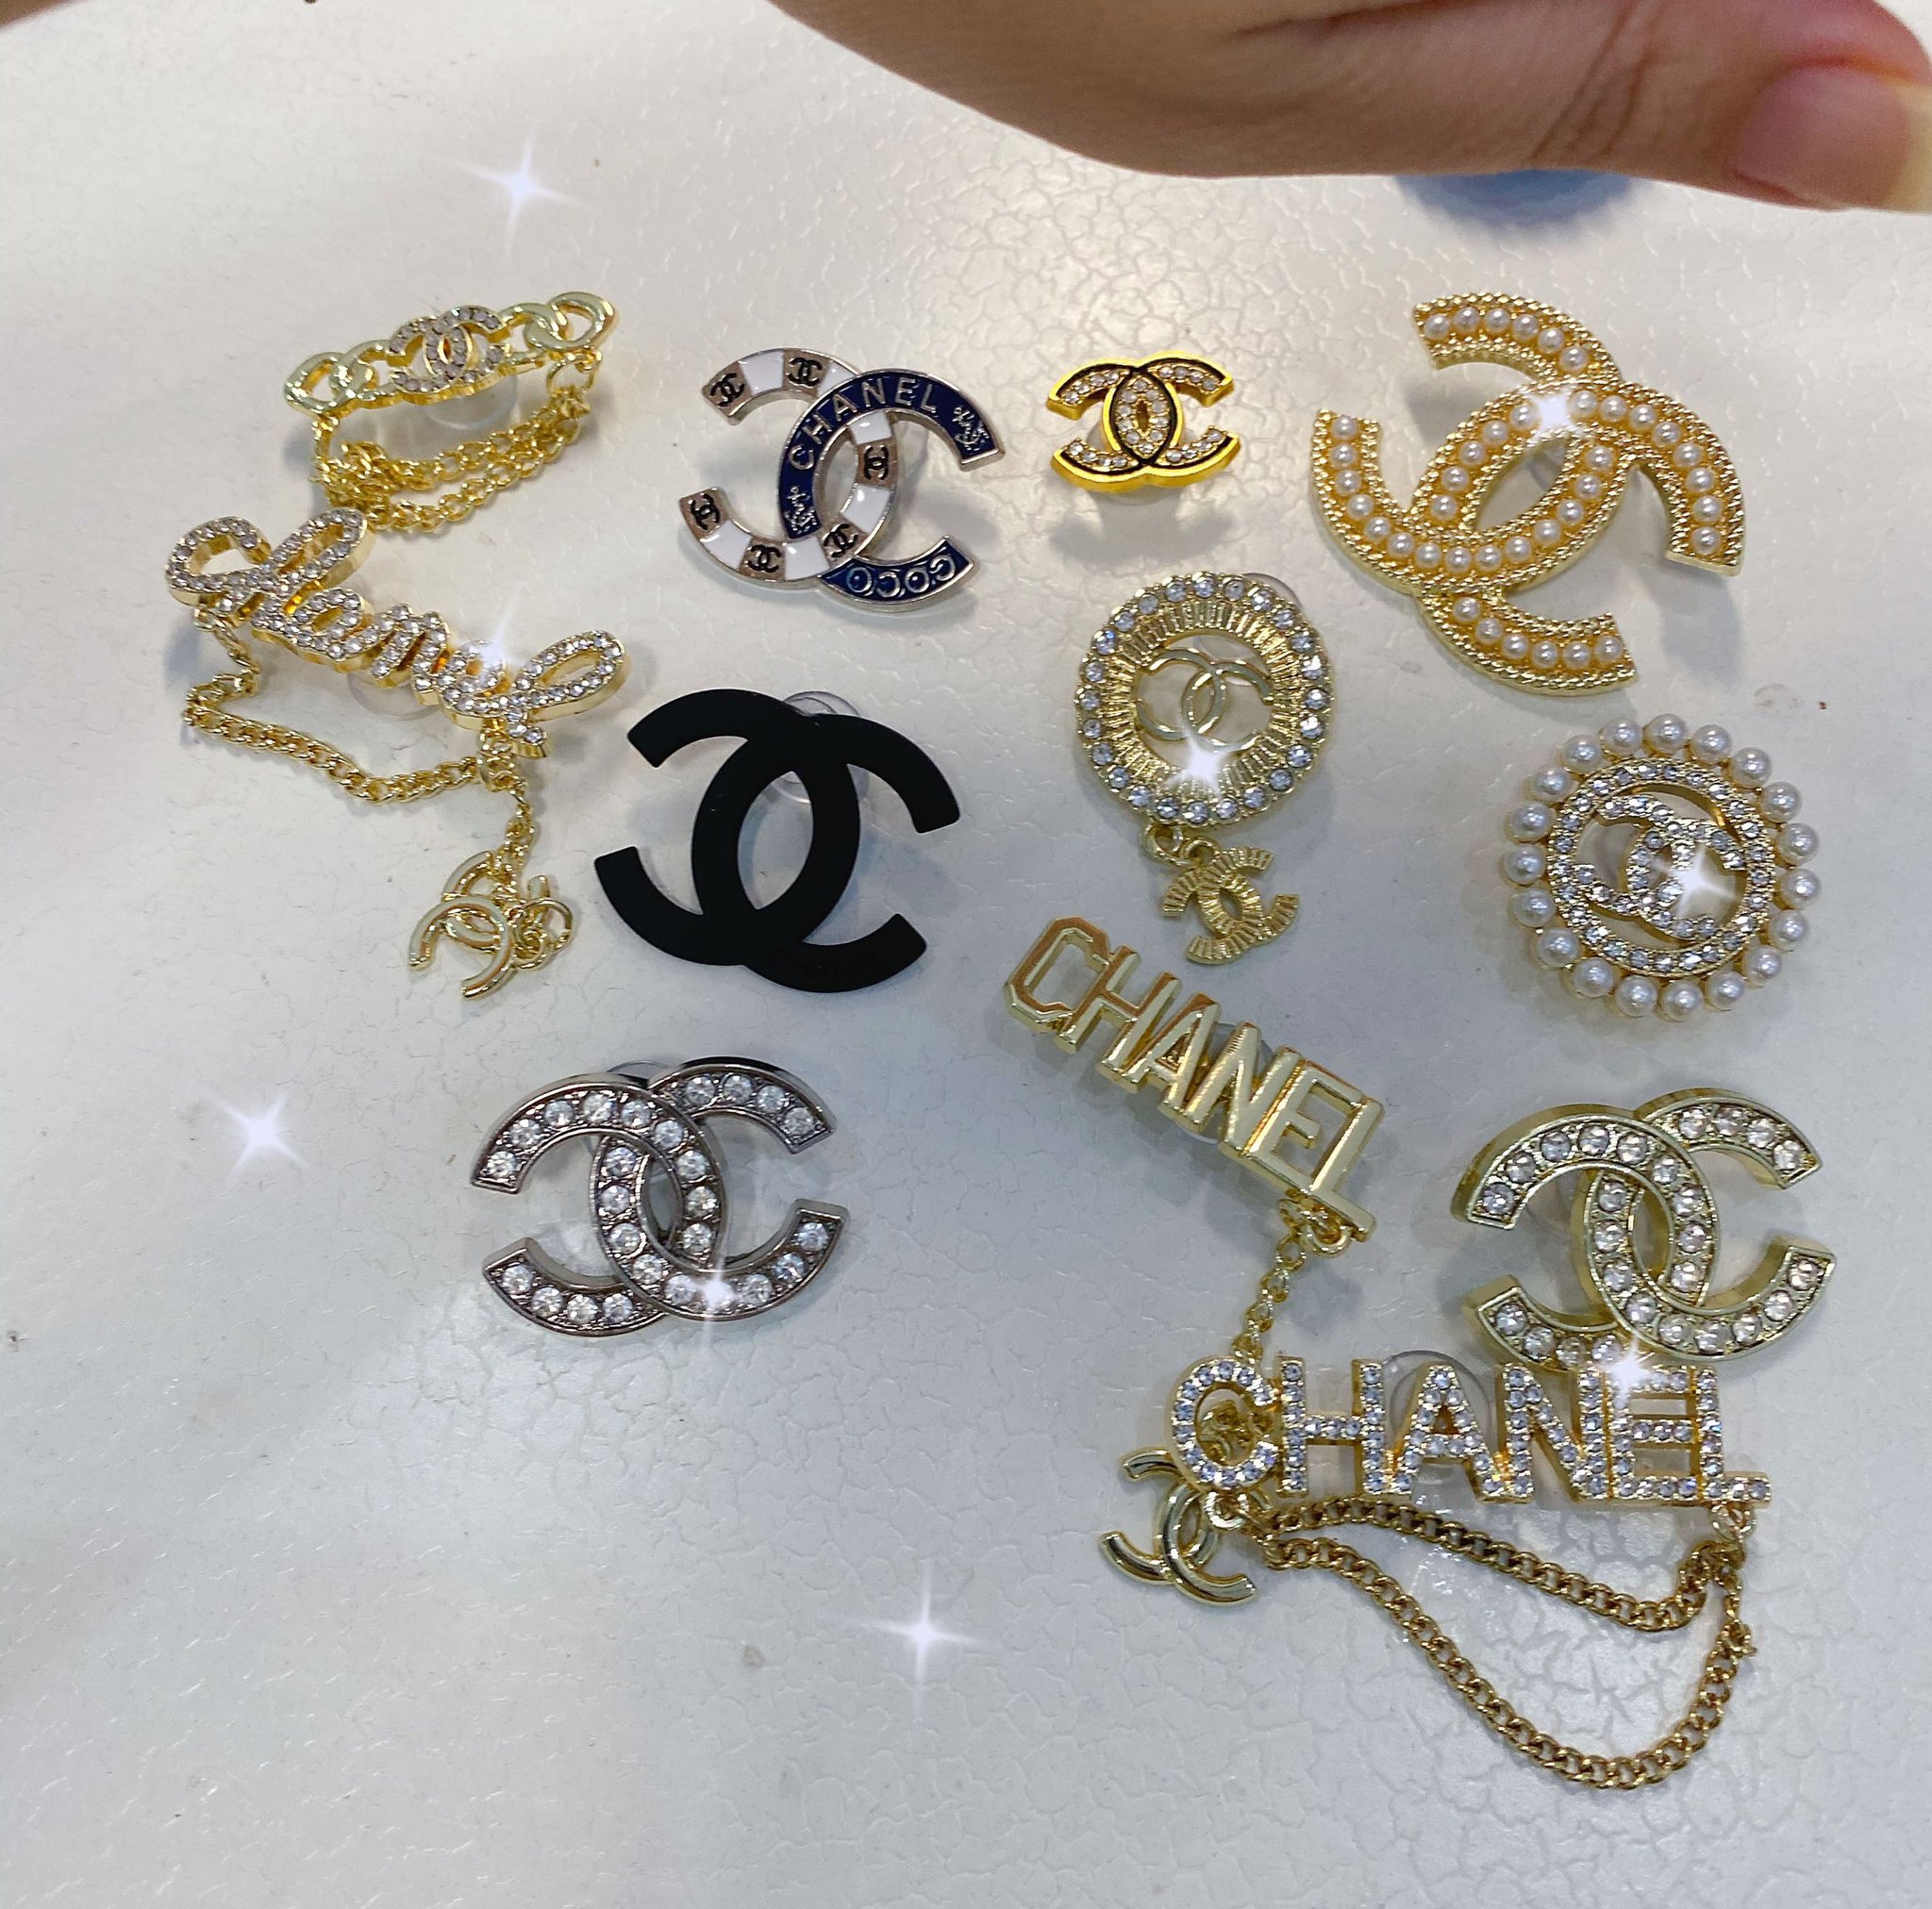 FREE Shipping Over $15Chanel Croc Charms , chanel jibbitz 